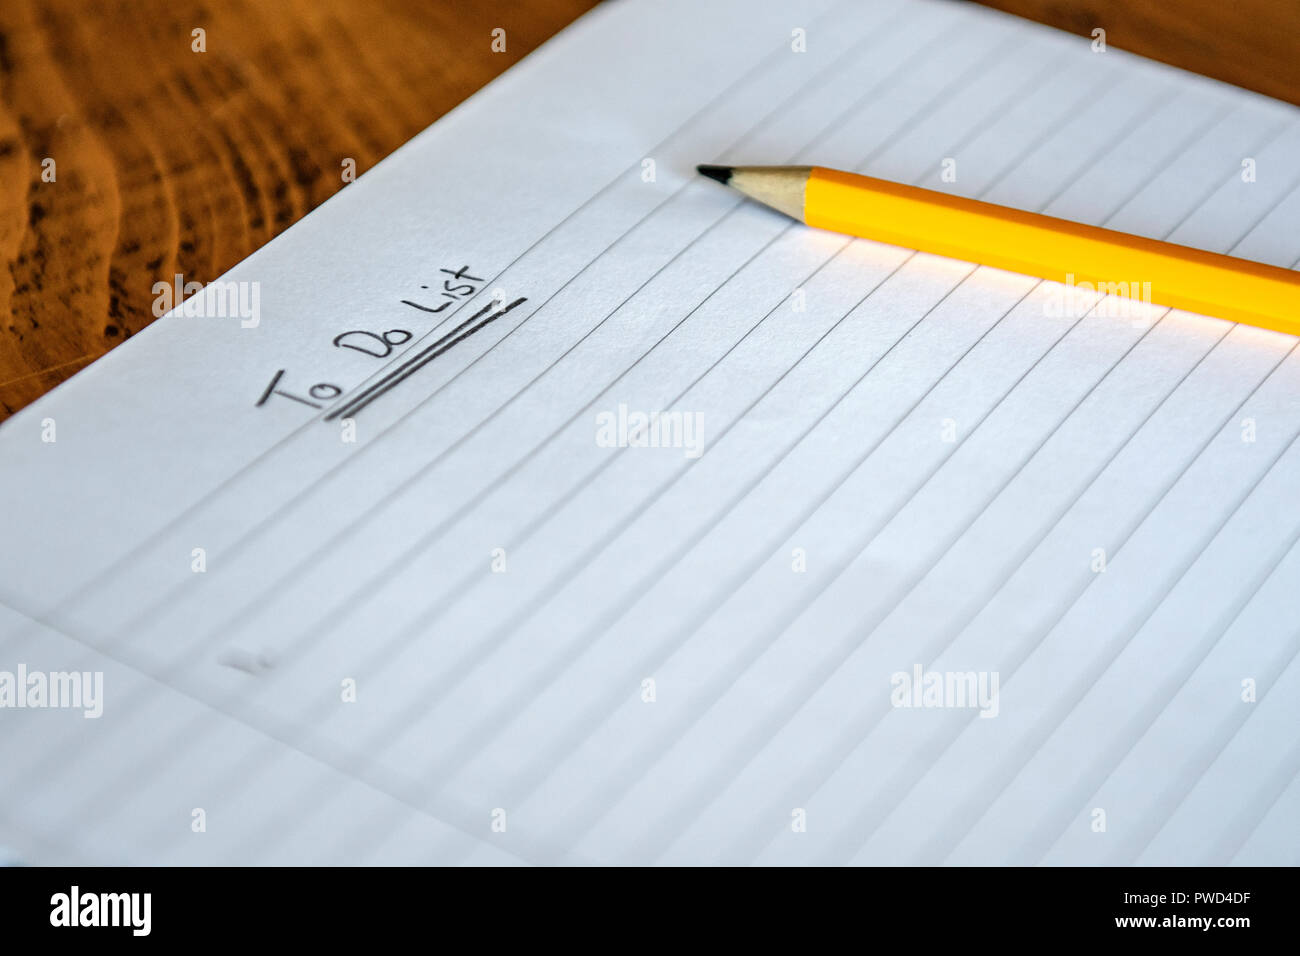 Pencil and Paper. Blank note pad awaiting ideas Stock Photo